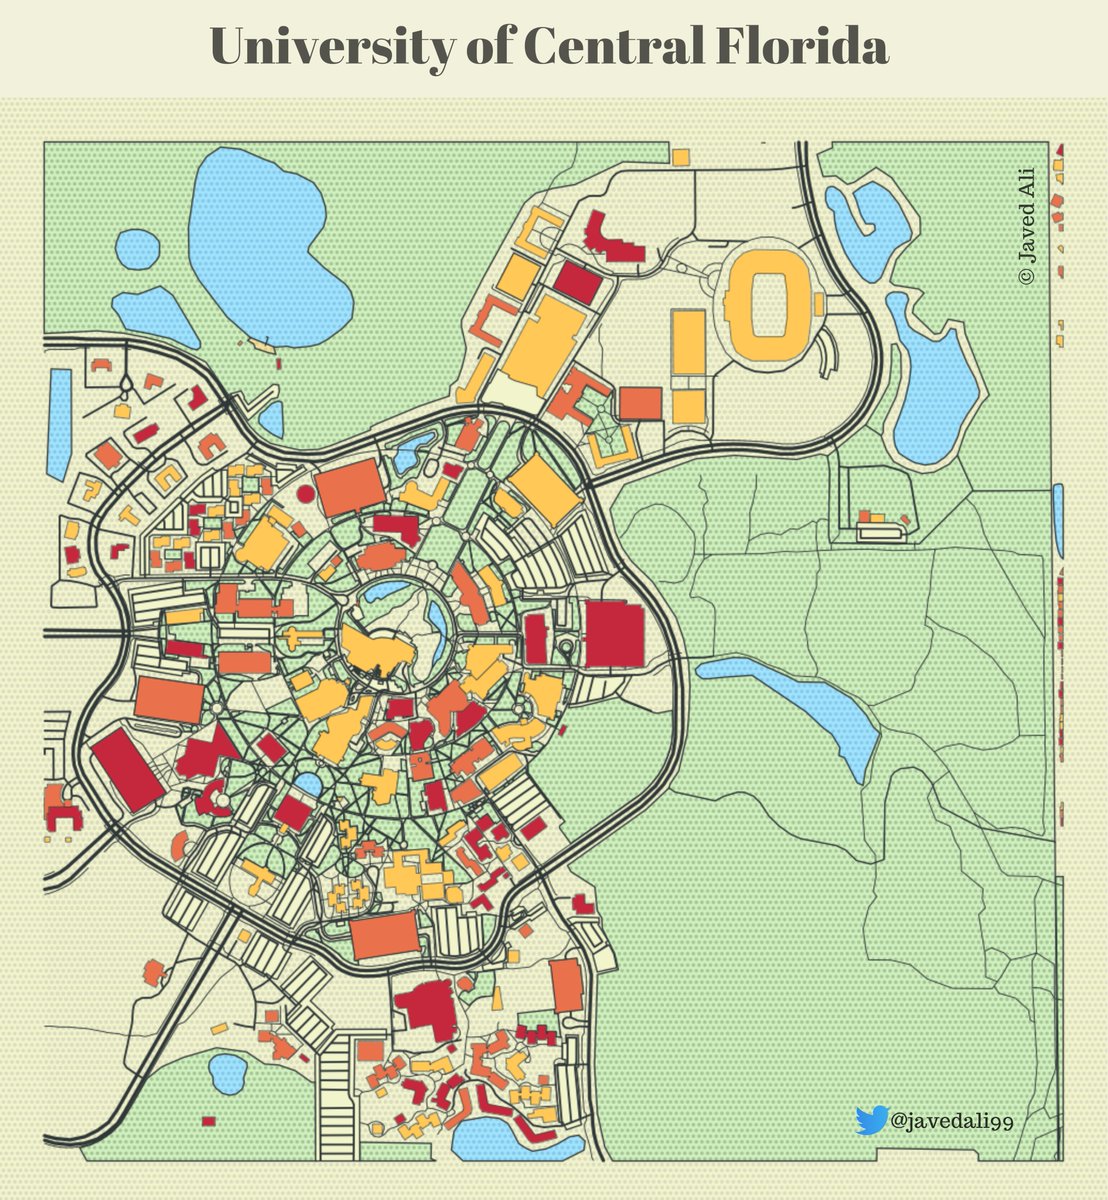 Created this beautiful map of @UCF's campus using #Python! 🗺️

It showcases the beauty of the UCF campus, featuring academic #buildings, #water bodies and relaxing #green areas.🖤💛

@UCFGradStudies @UCFALUMNI @UCFCECS @ucfcece #KnightPride #CampusLife #UCFCommunity #KnightNation